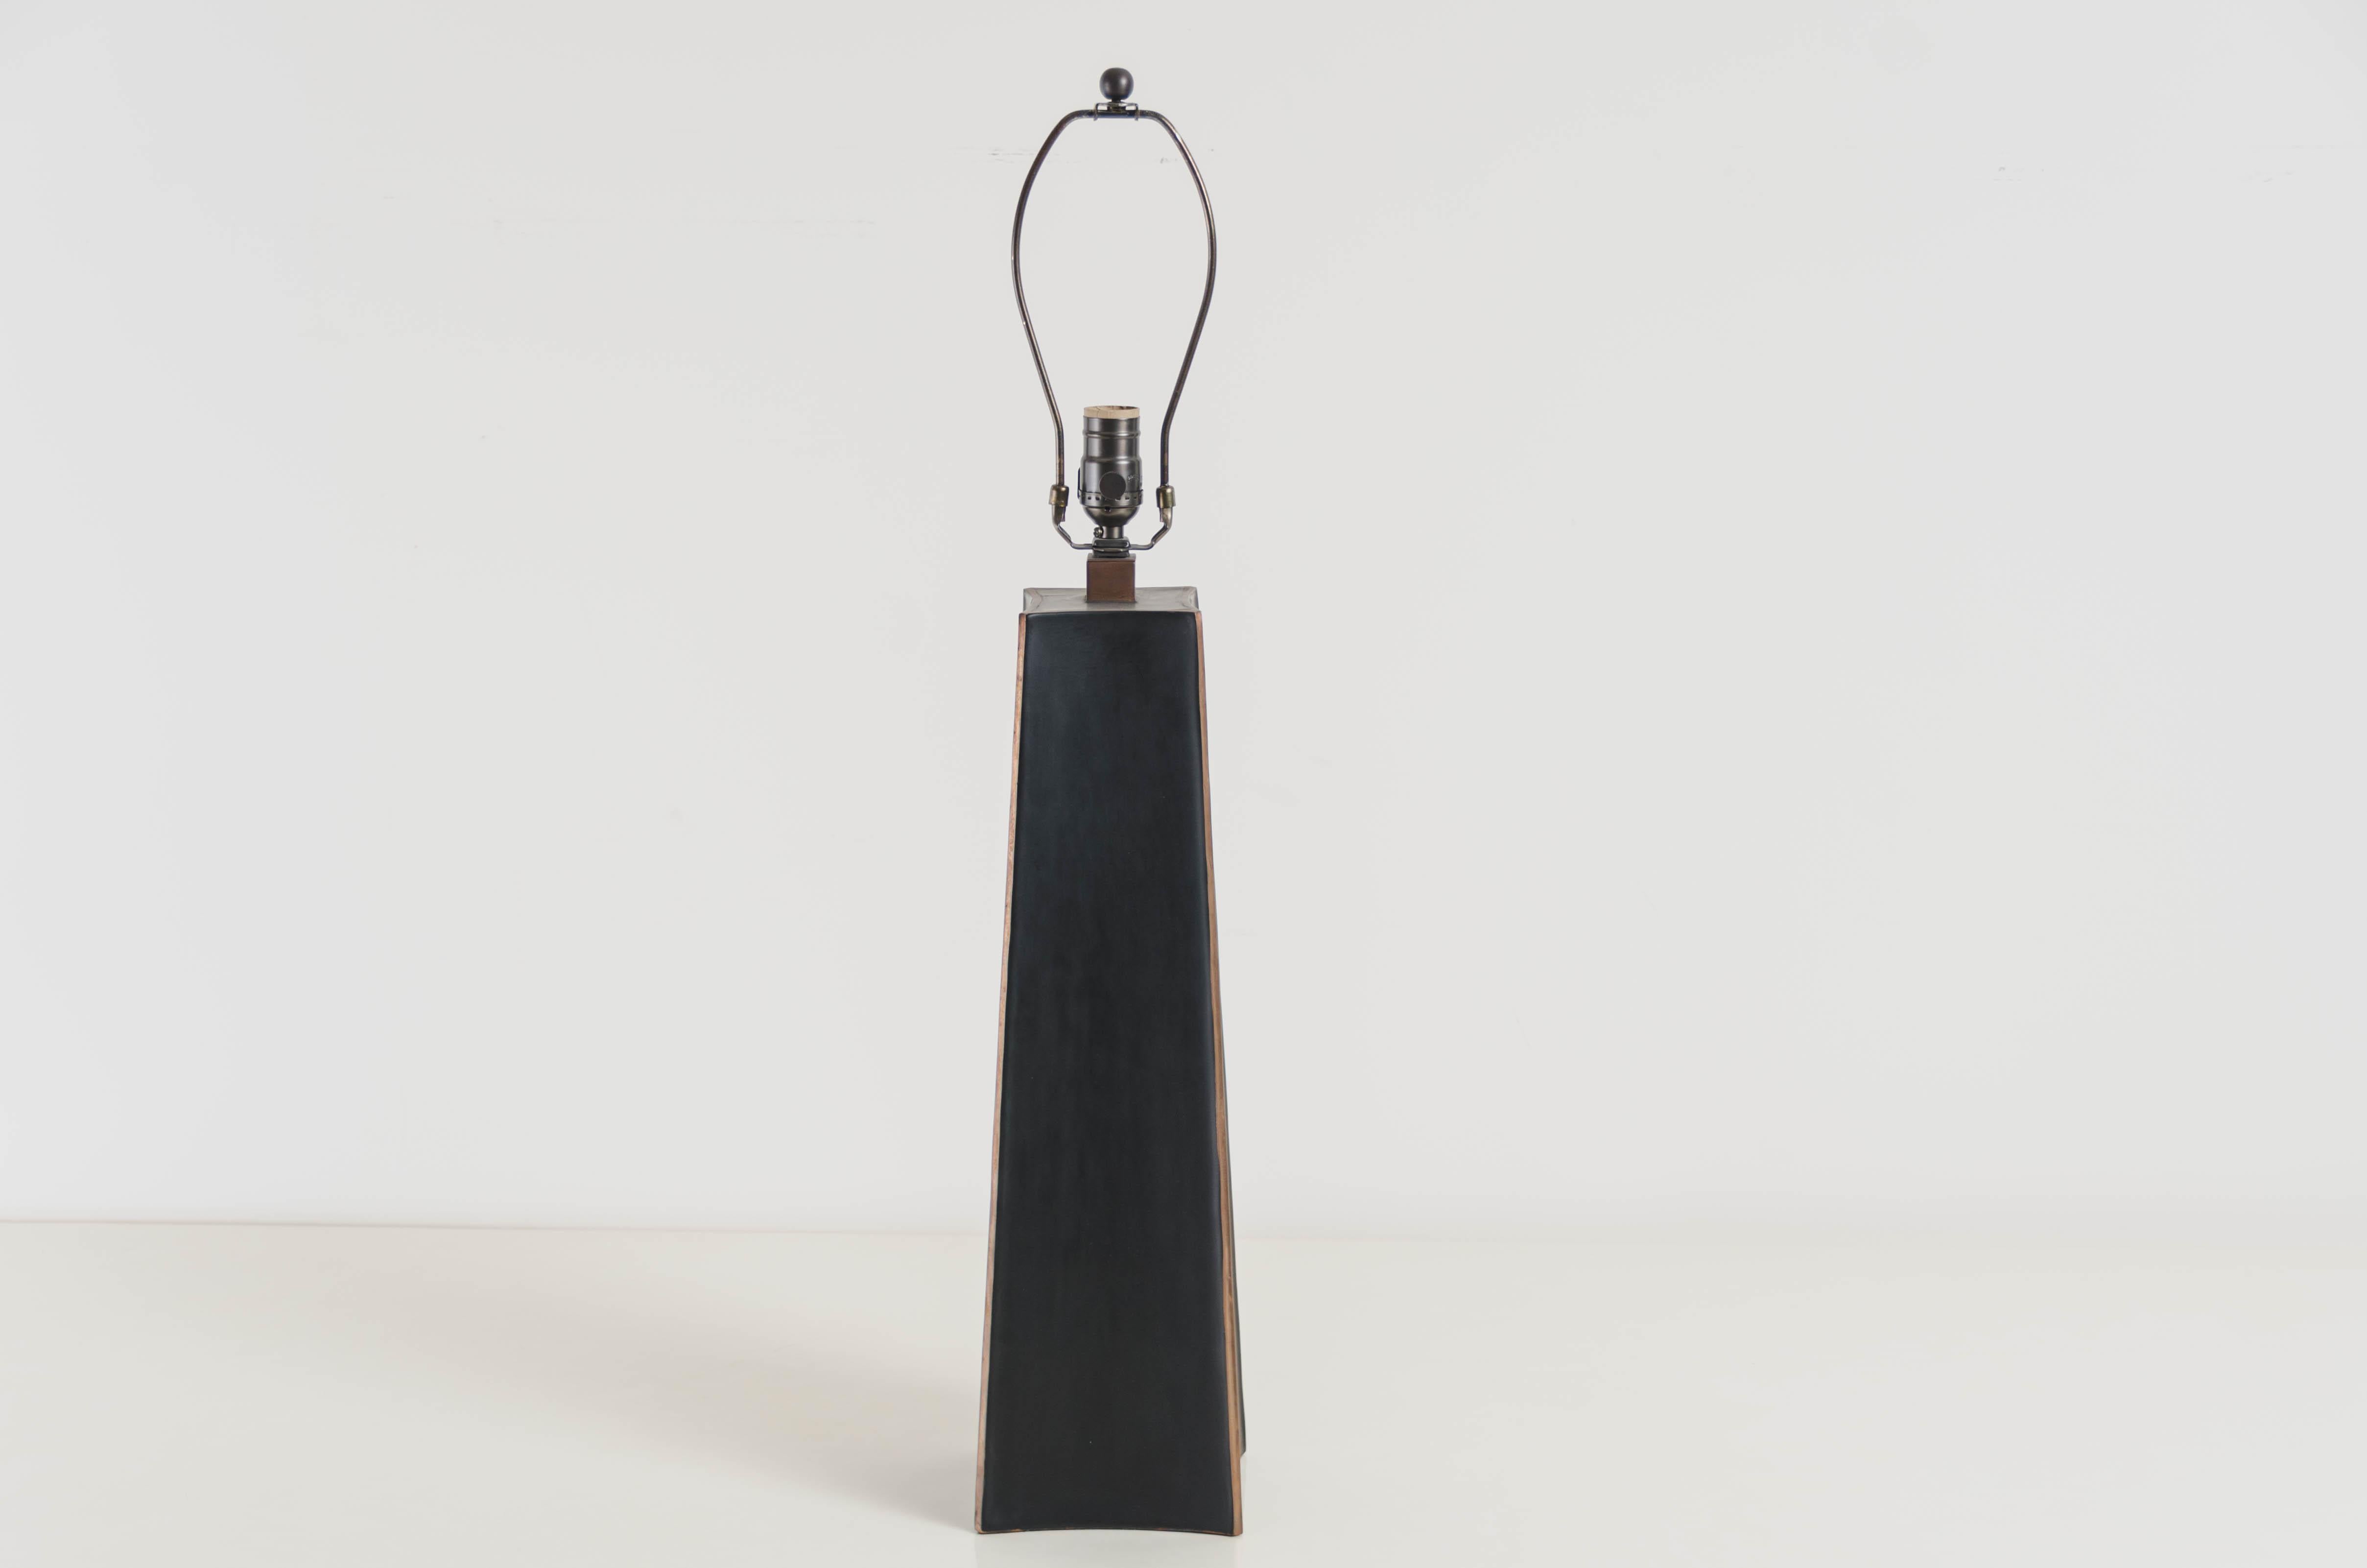 Repoussé Si Wa Table Lamp, Black Lacquer by Robert Kuo, Hand Repousse, Limited Edition For Sale